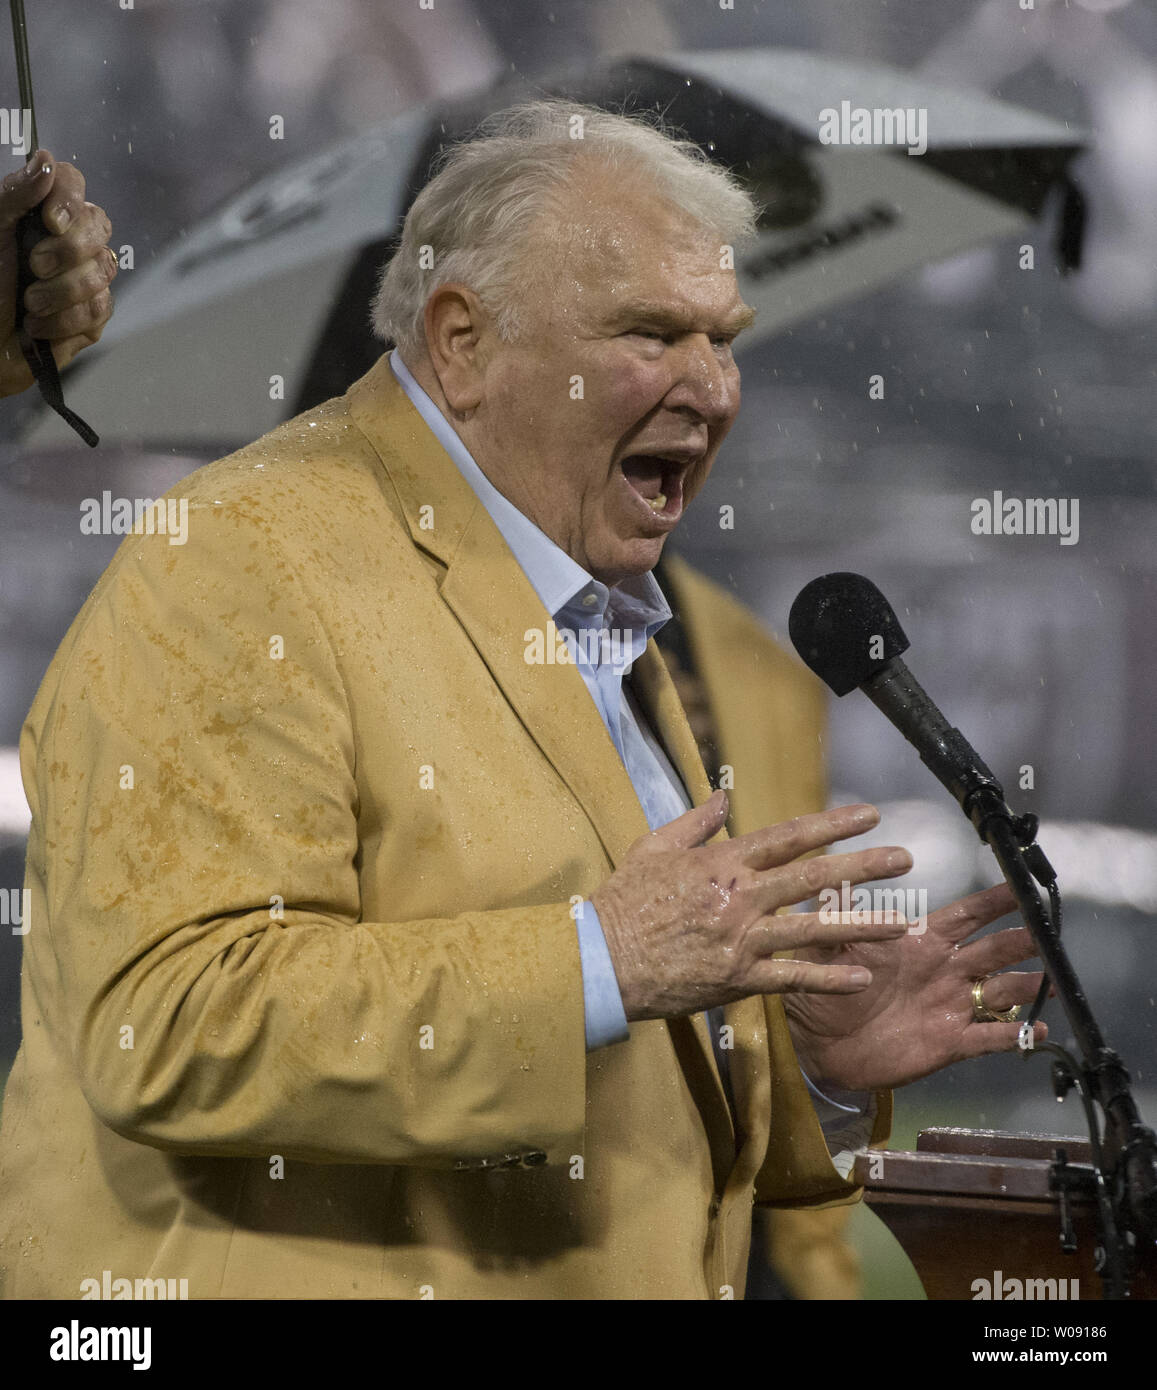 Oakland Raiders Hall of Fame coach John Madden speaks at a ceremony honoring newest HOF inductee punter Ray Guy at halftime of a game against the Kansas City Chiefs at O.co Coliseum in Oakland, California on November 20, 2014. The 1-10 Raiders notched their first win in 368 days, beating the Chiefs 24-20.   UPI/Terry Schmitt Stock Photo